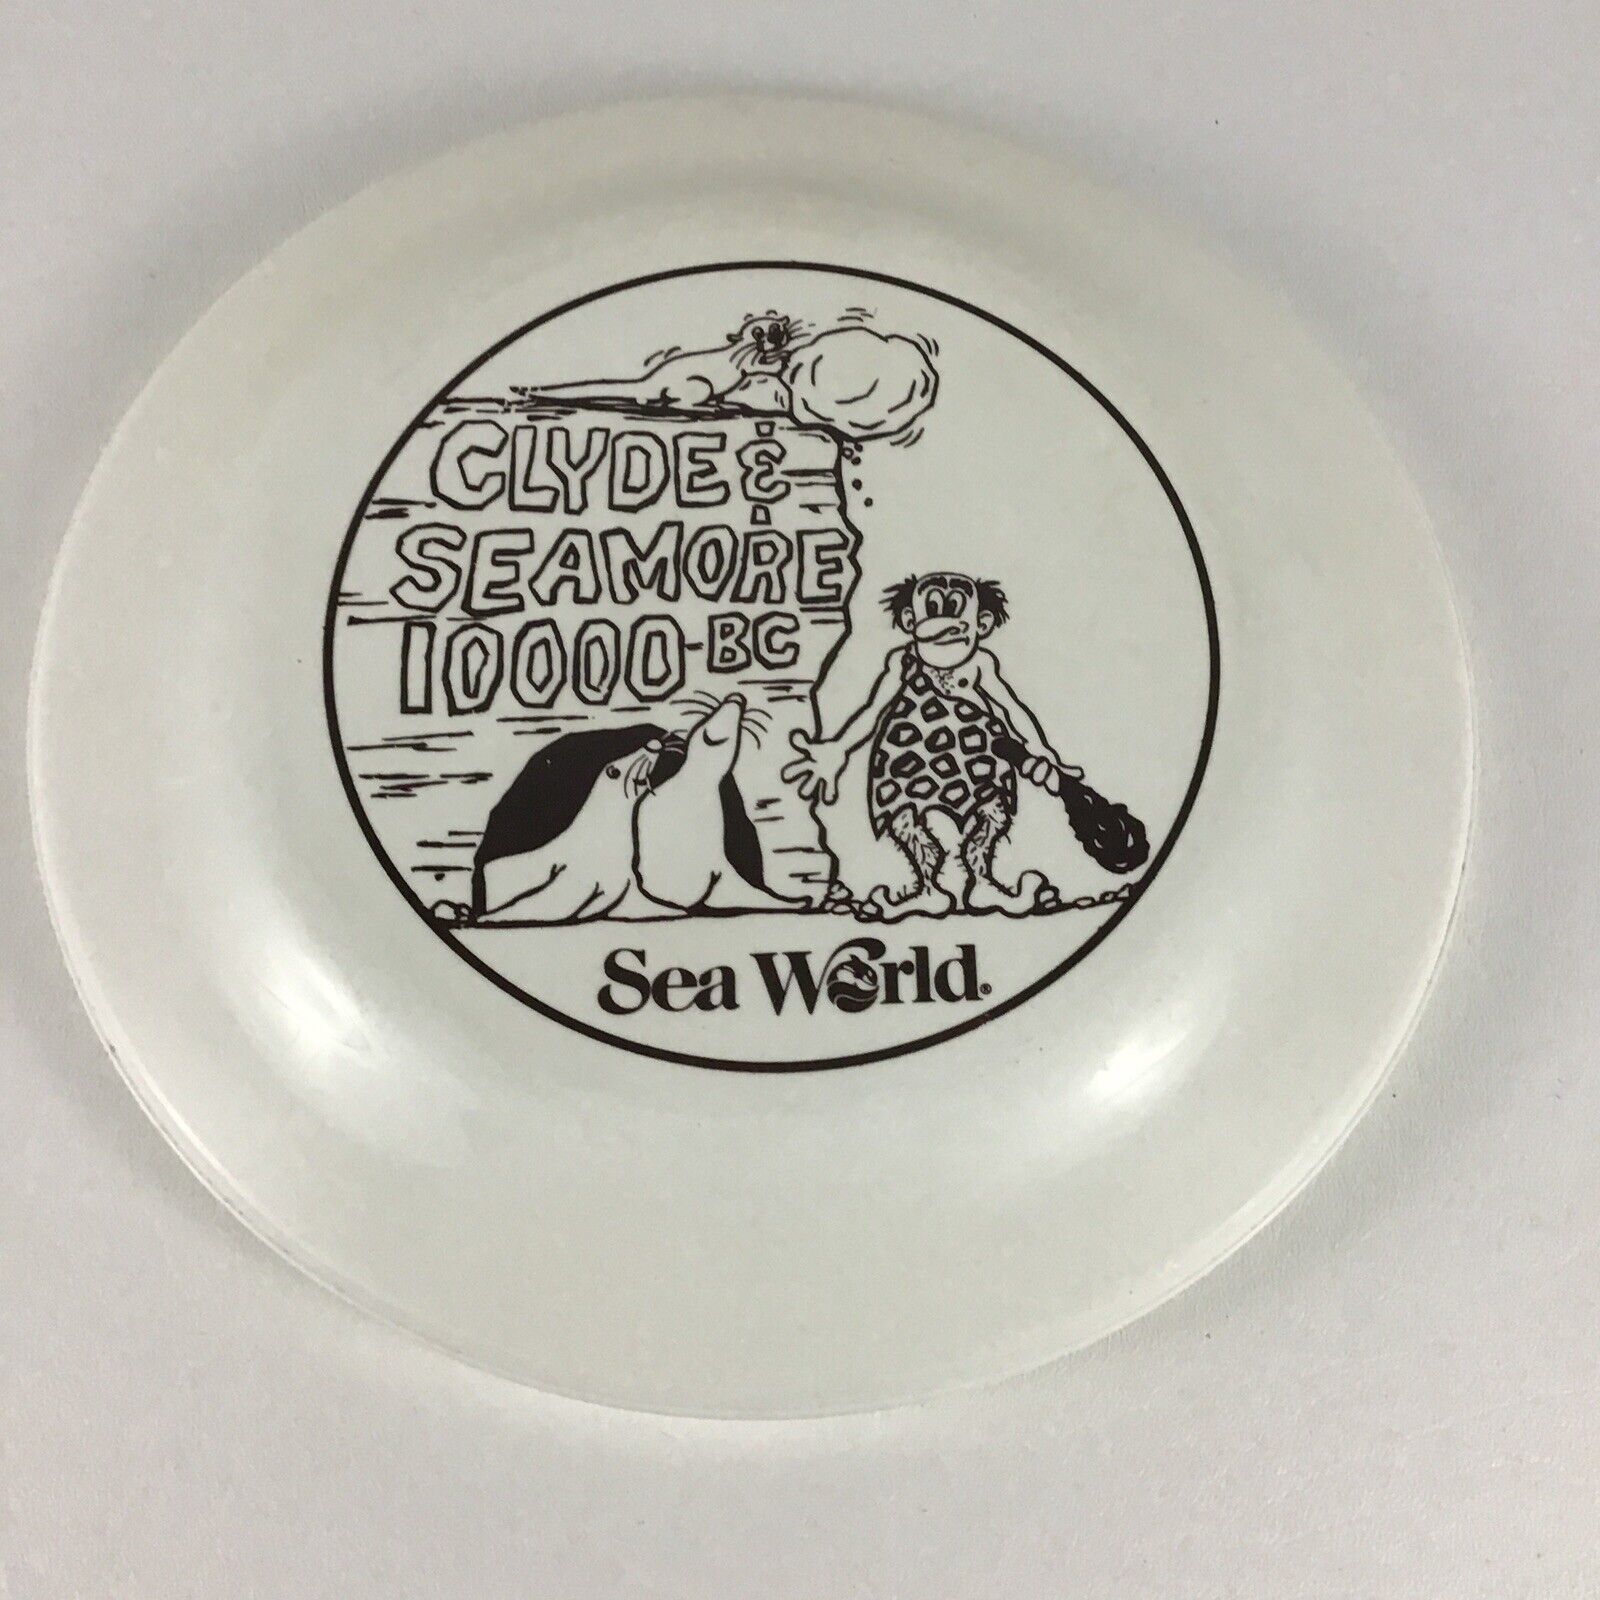 Primary image for Sea World Clyde & Seymore 1000 BC Frisbee Theme Park Souvenir Vintage 1990's Toy